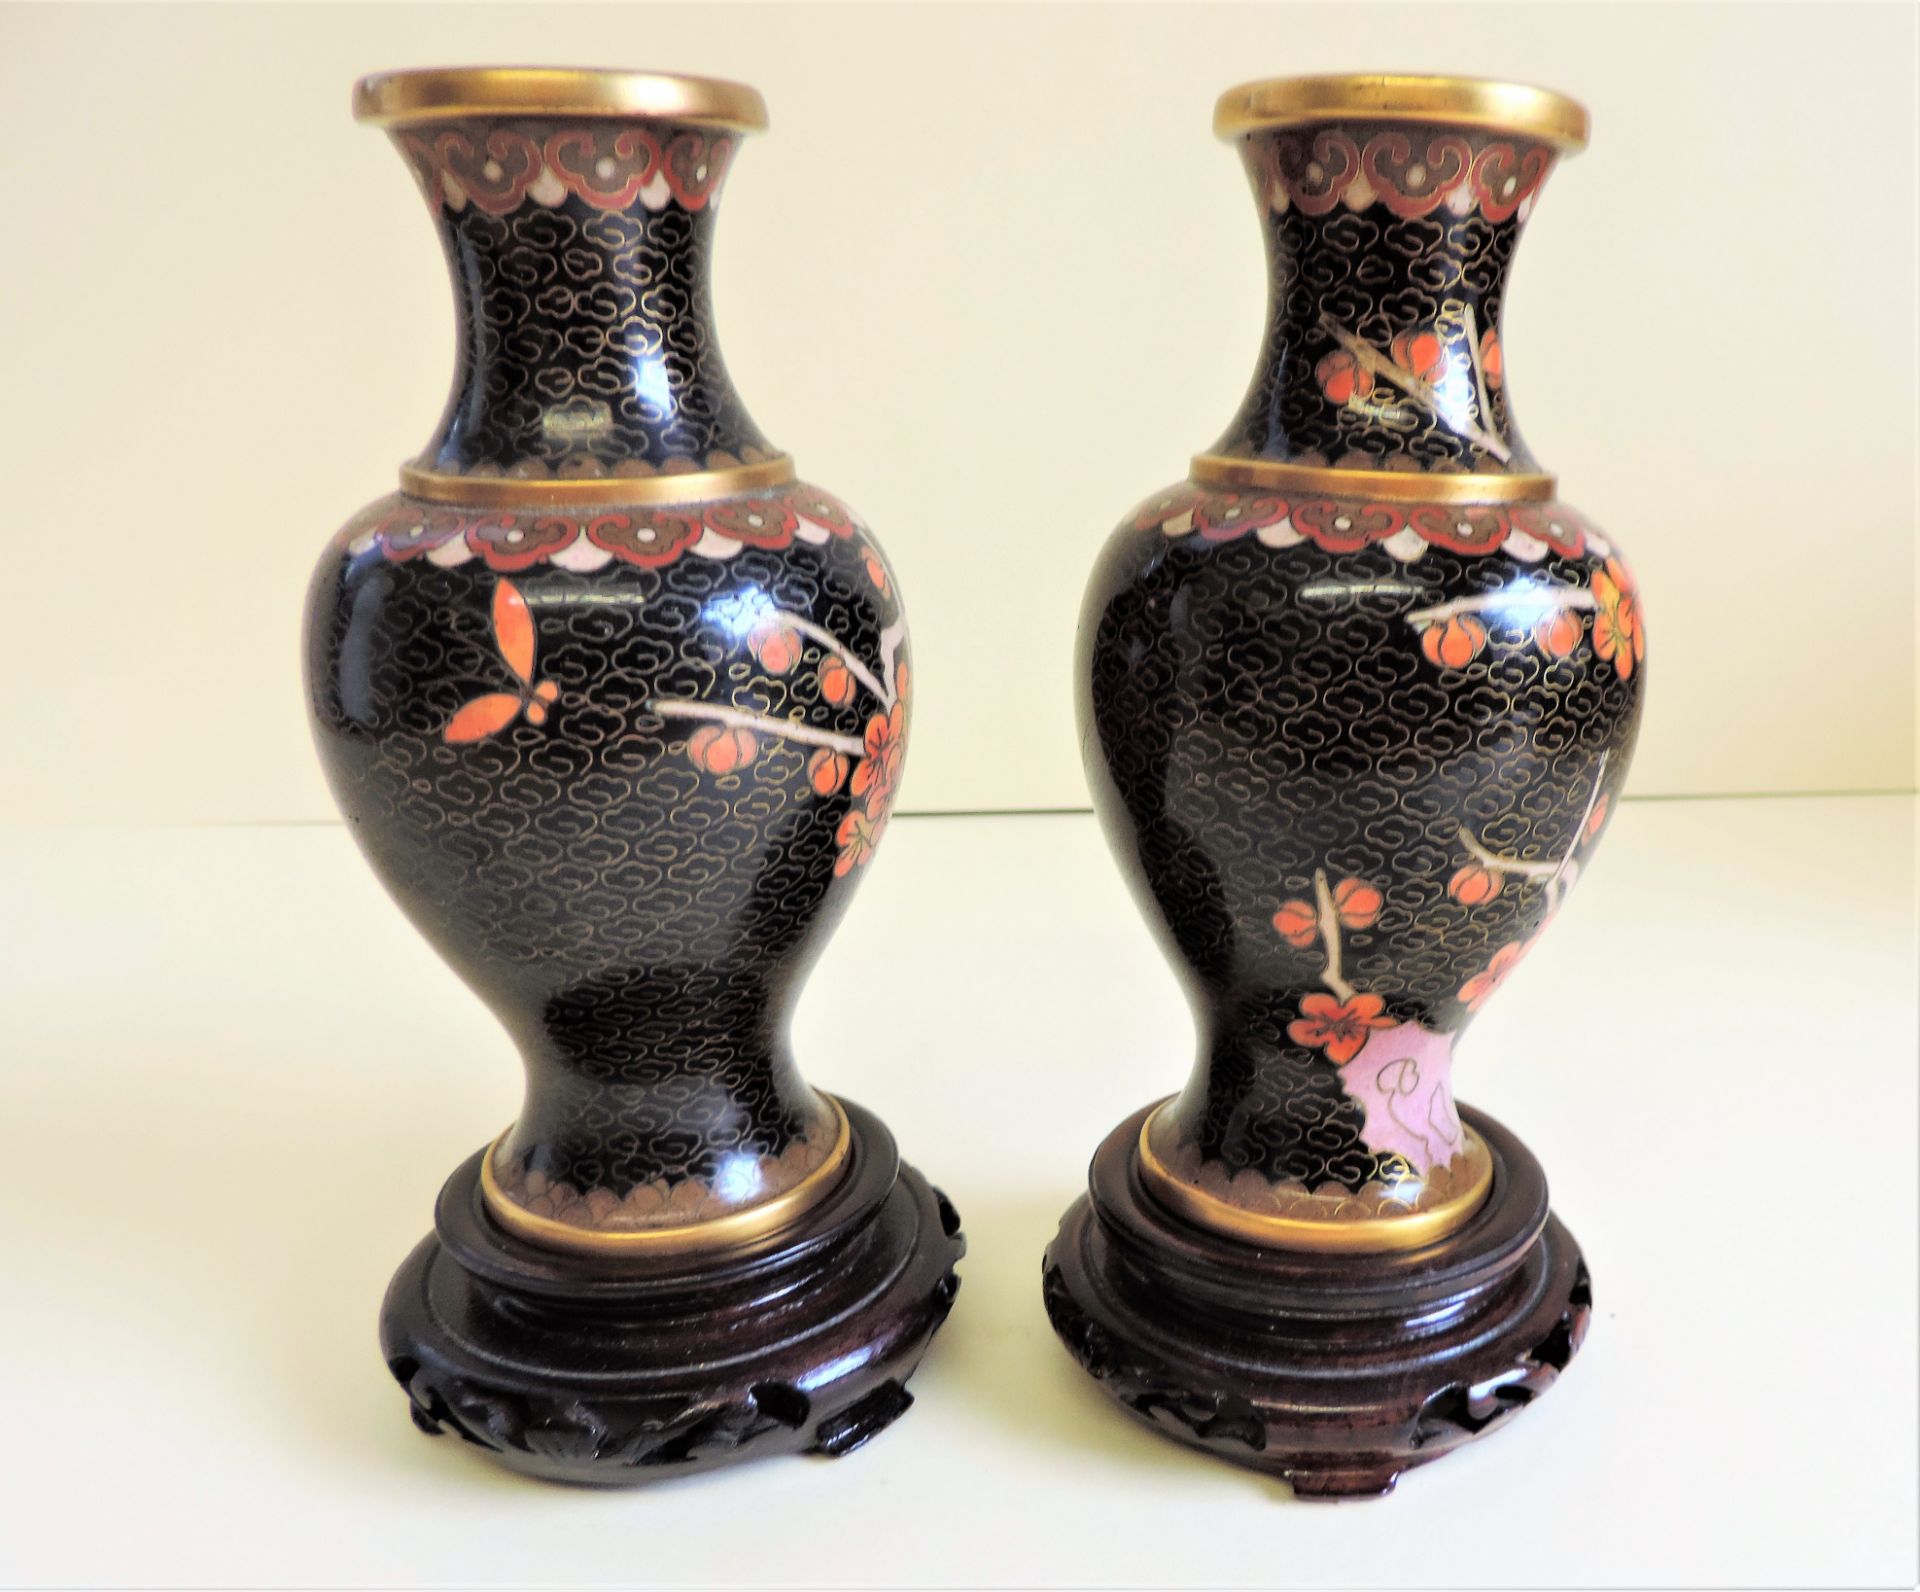 Pair of Vintage Chinese Cloisonne Vases Cherry Blossom Decoration - Image 2 of 9